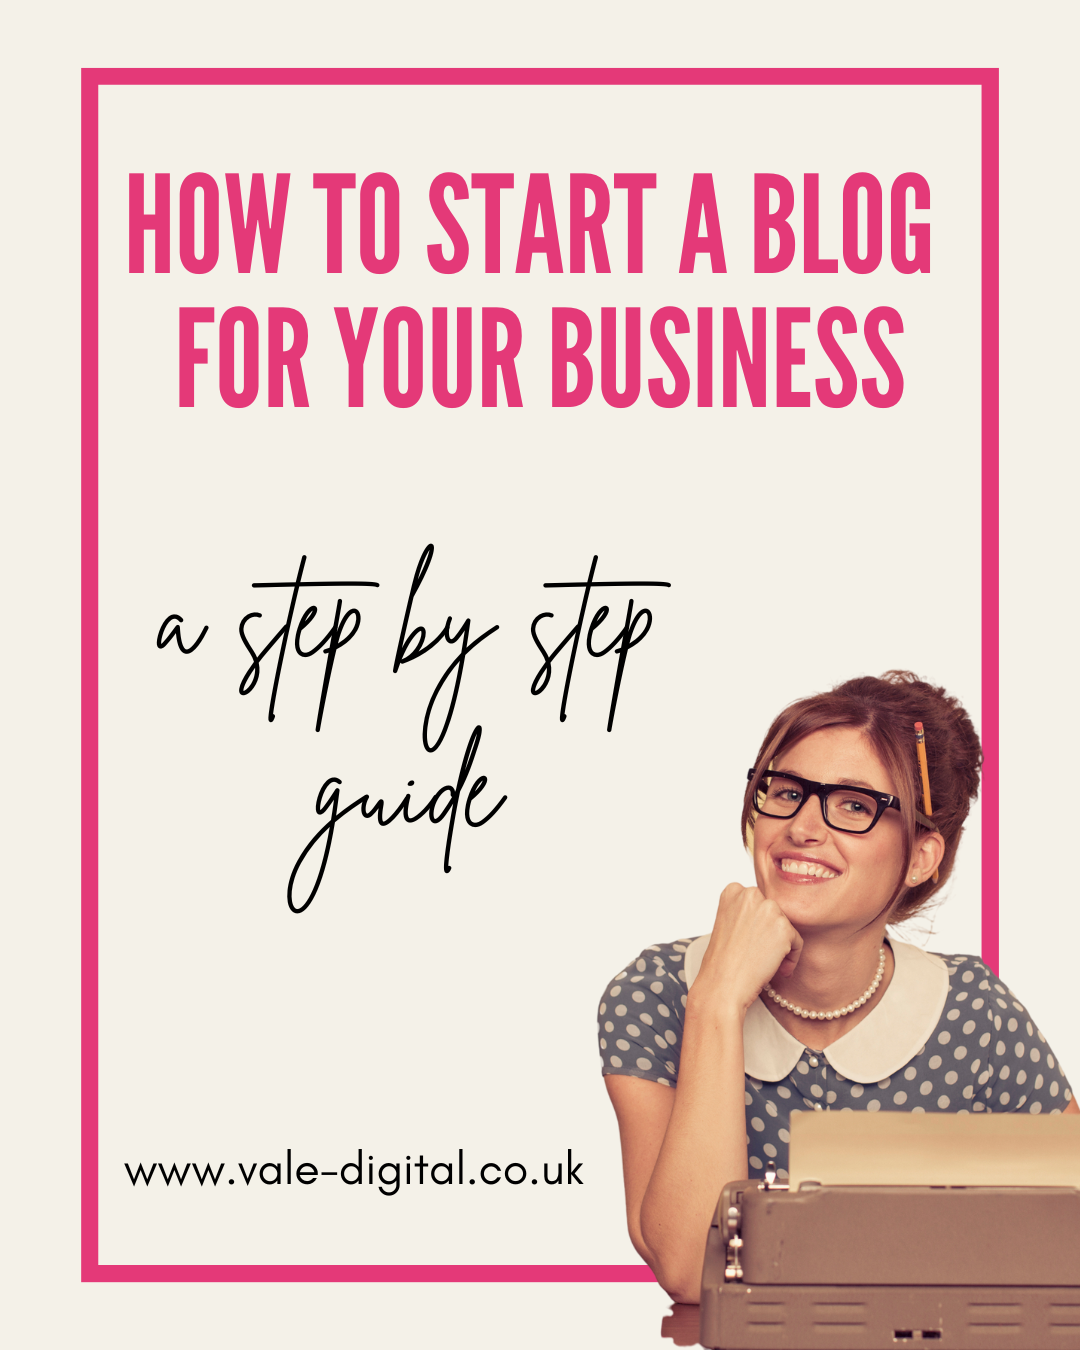 How to start a blog for your business